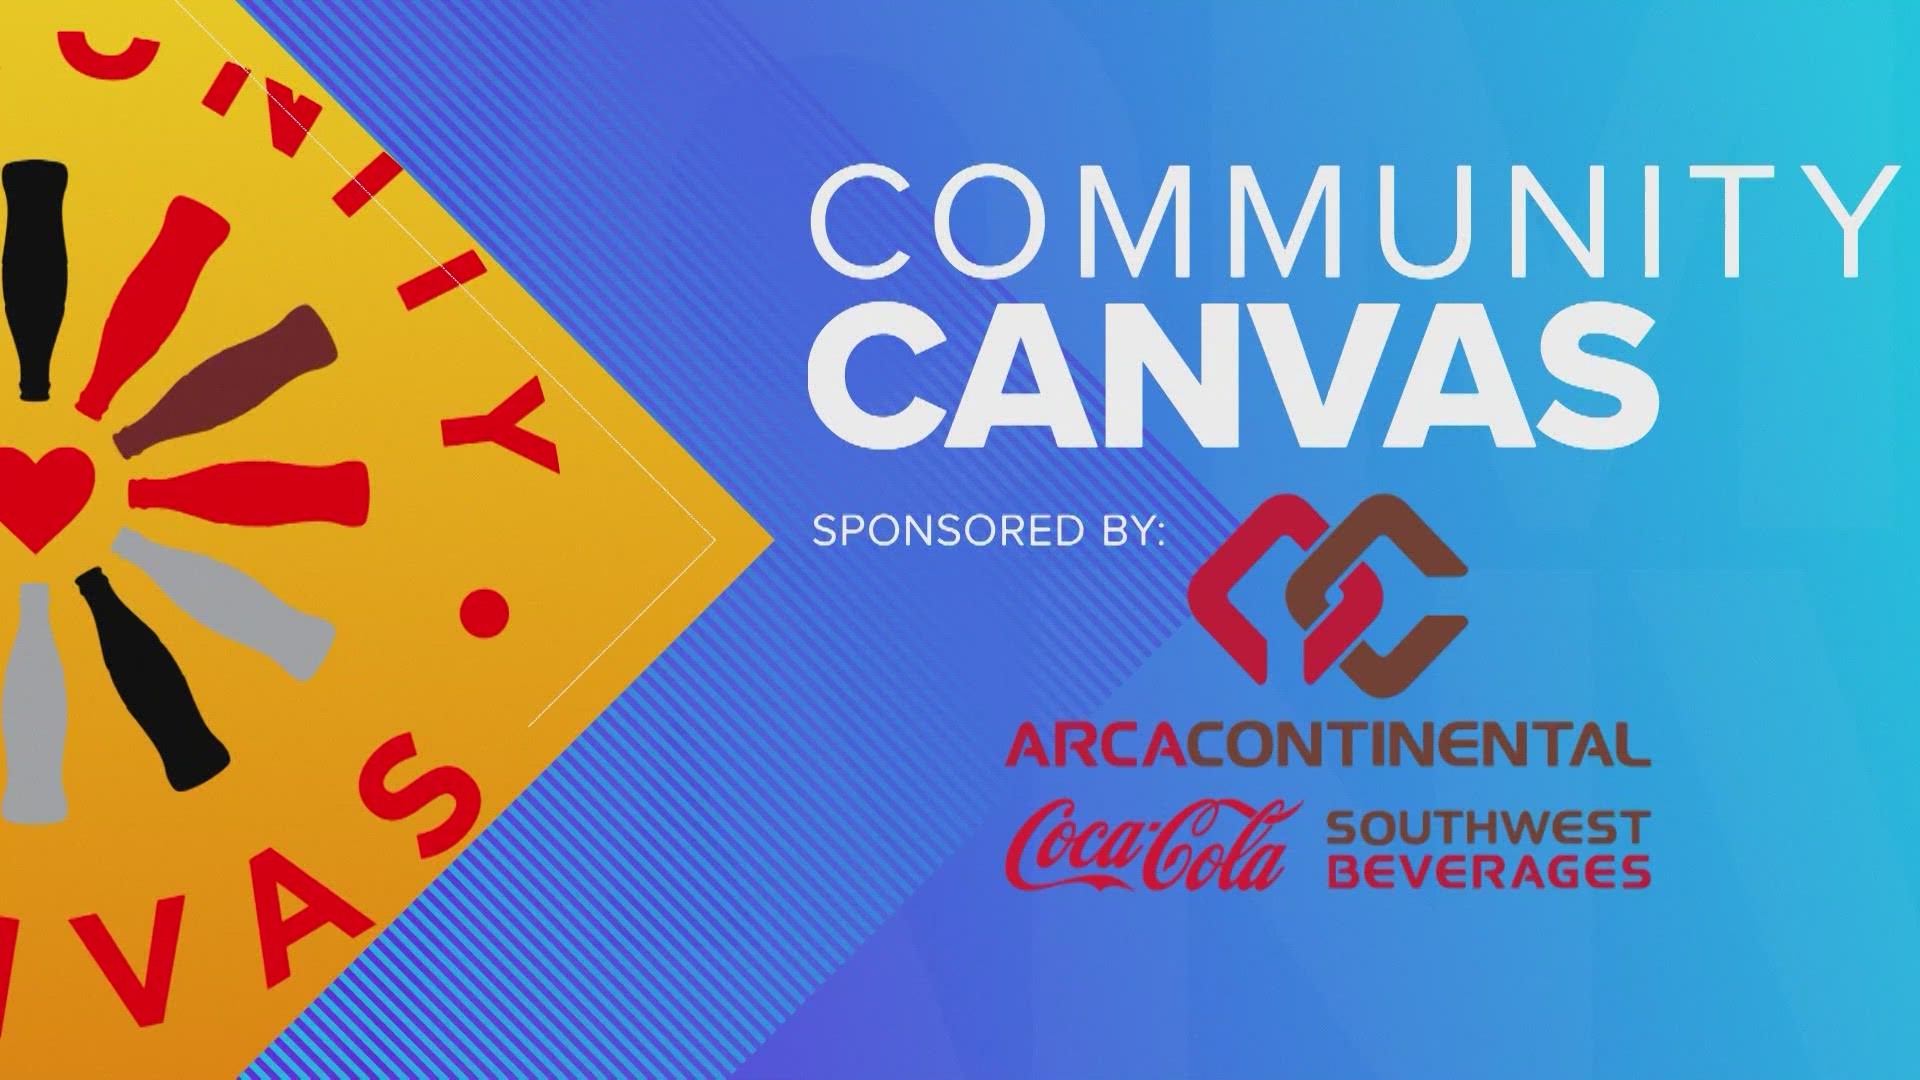 This segment is sponsored by Coca-Cola Southwest Beverages.